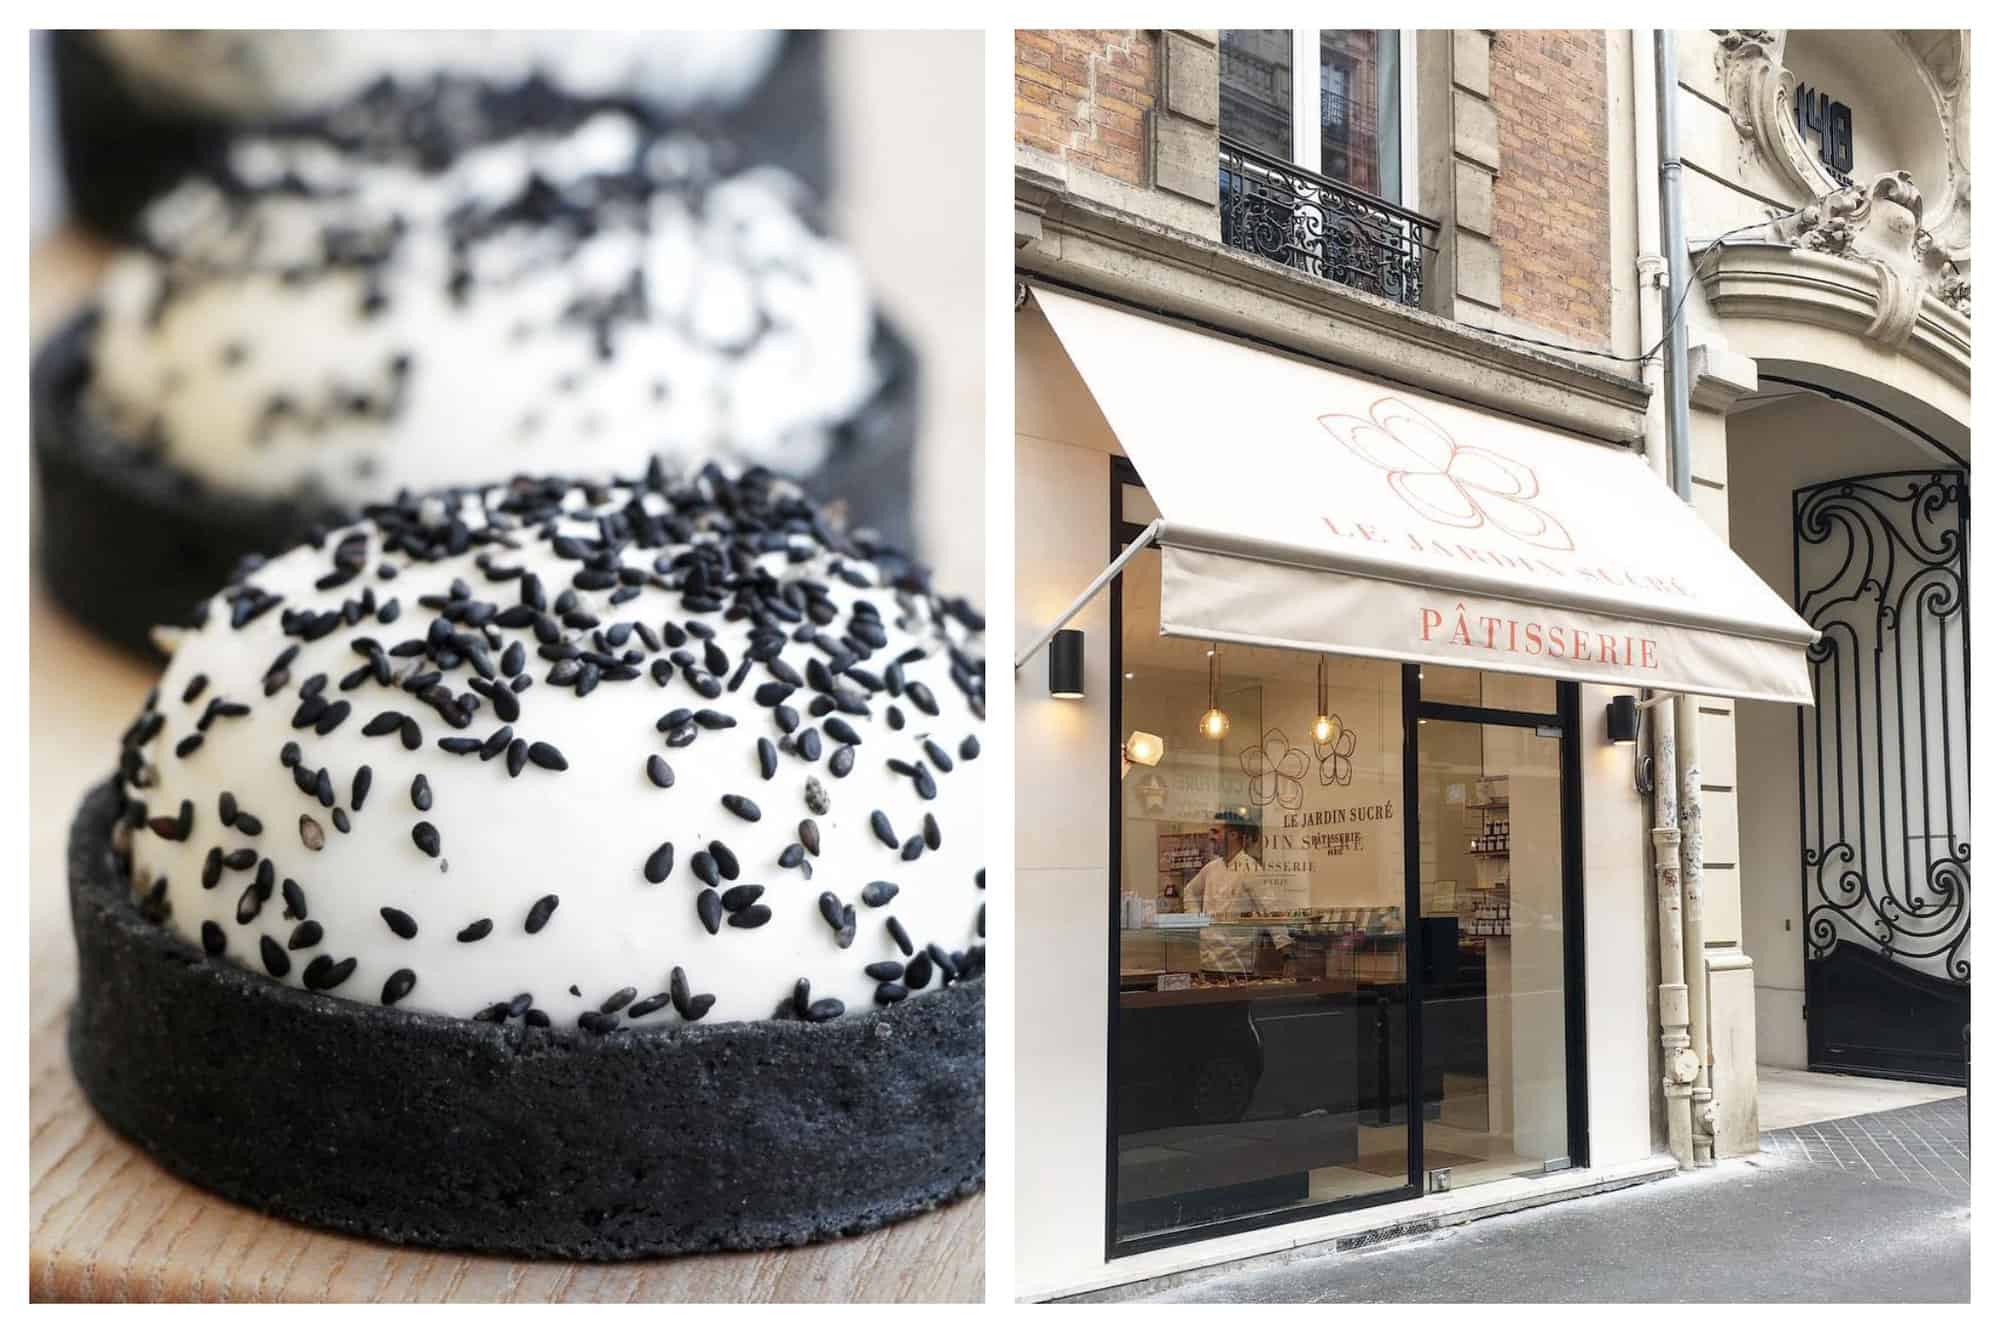 A montage of 2 photos from Parisian Patisserie Le Jardin Sucré. Left: Their famous Tarte Sesame Noir Yuzu — a tart of black crust and white filling and sprinkled with black sesame seeds. Right: A picture of their store beside a iron-wrought Parisian building gate. Their walls are painted beige and their lights are warm. You can see the interiors of the bakery along with one of their head bakers inside.